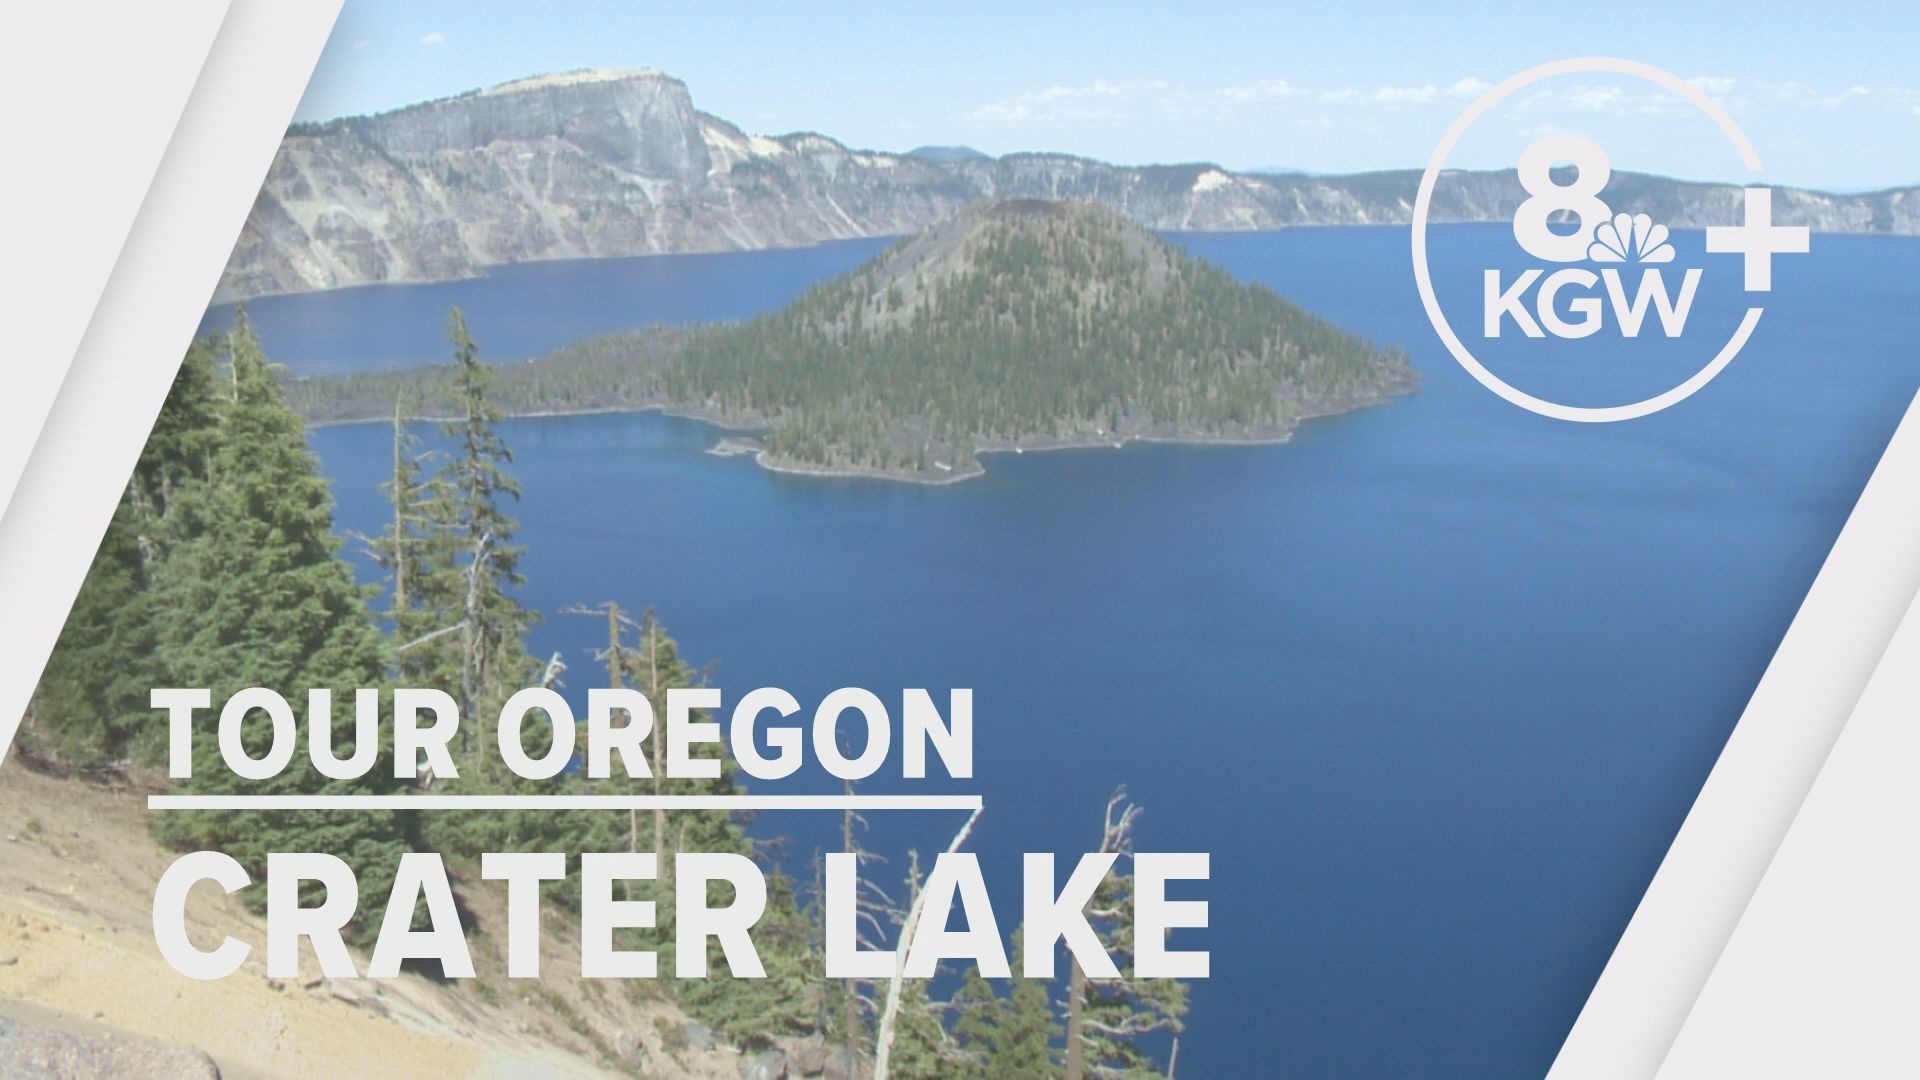 A few moments of late summer at majestic Crater Lake National Park and some of the bluest water on the planet